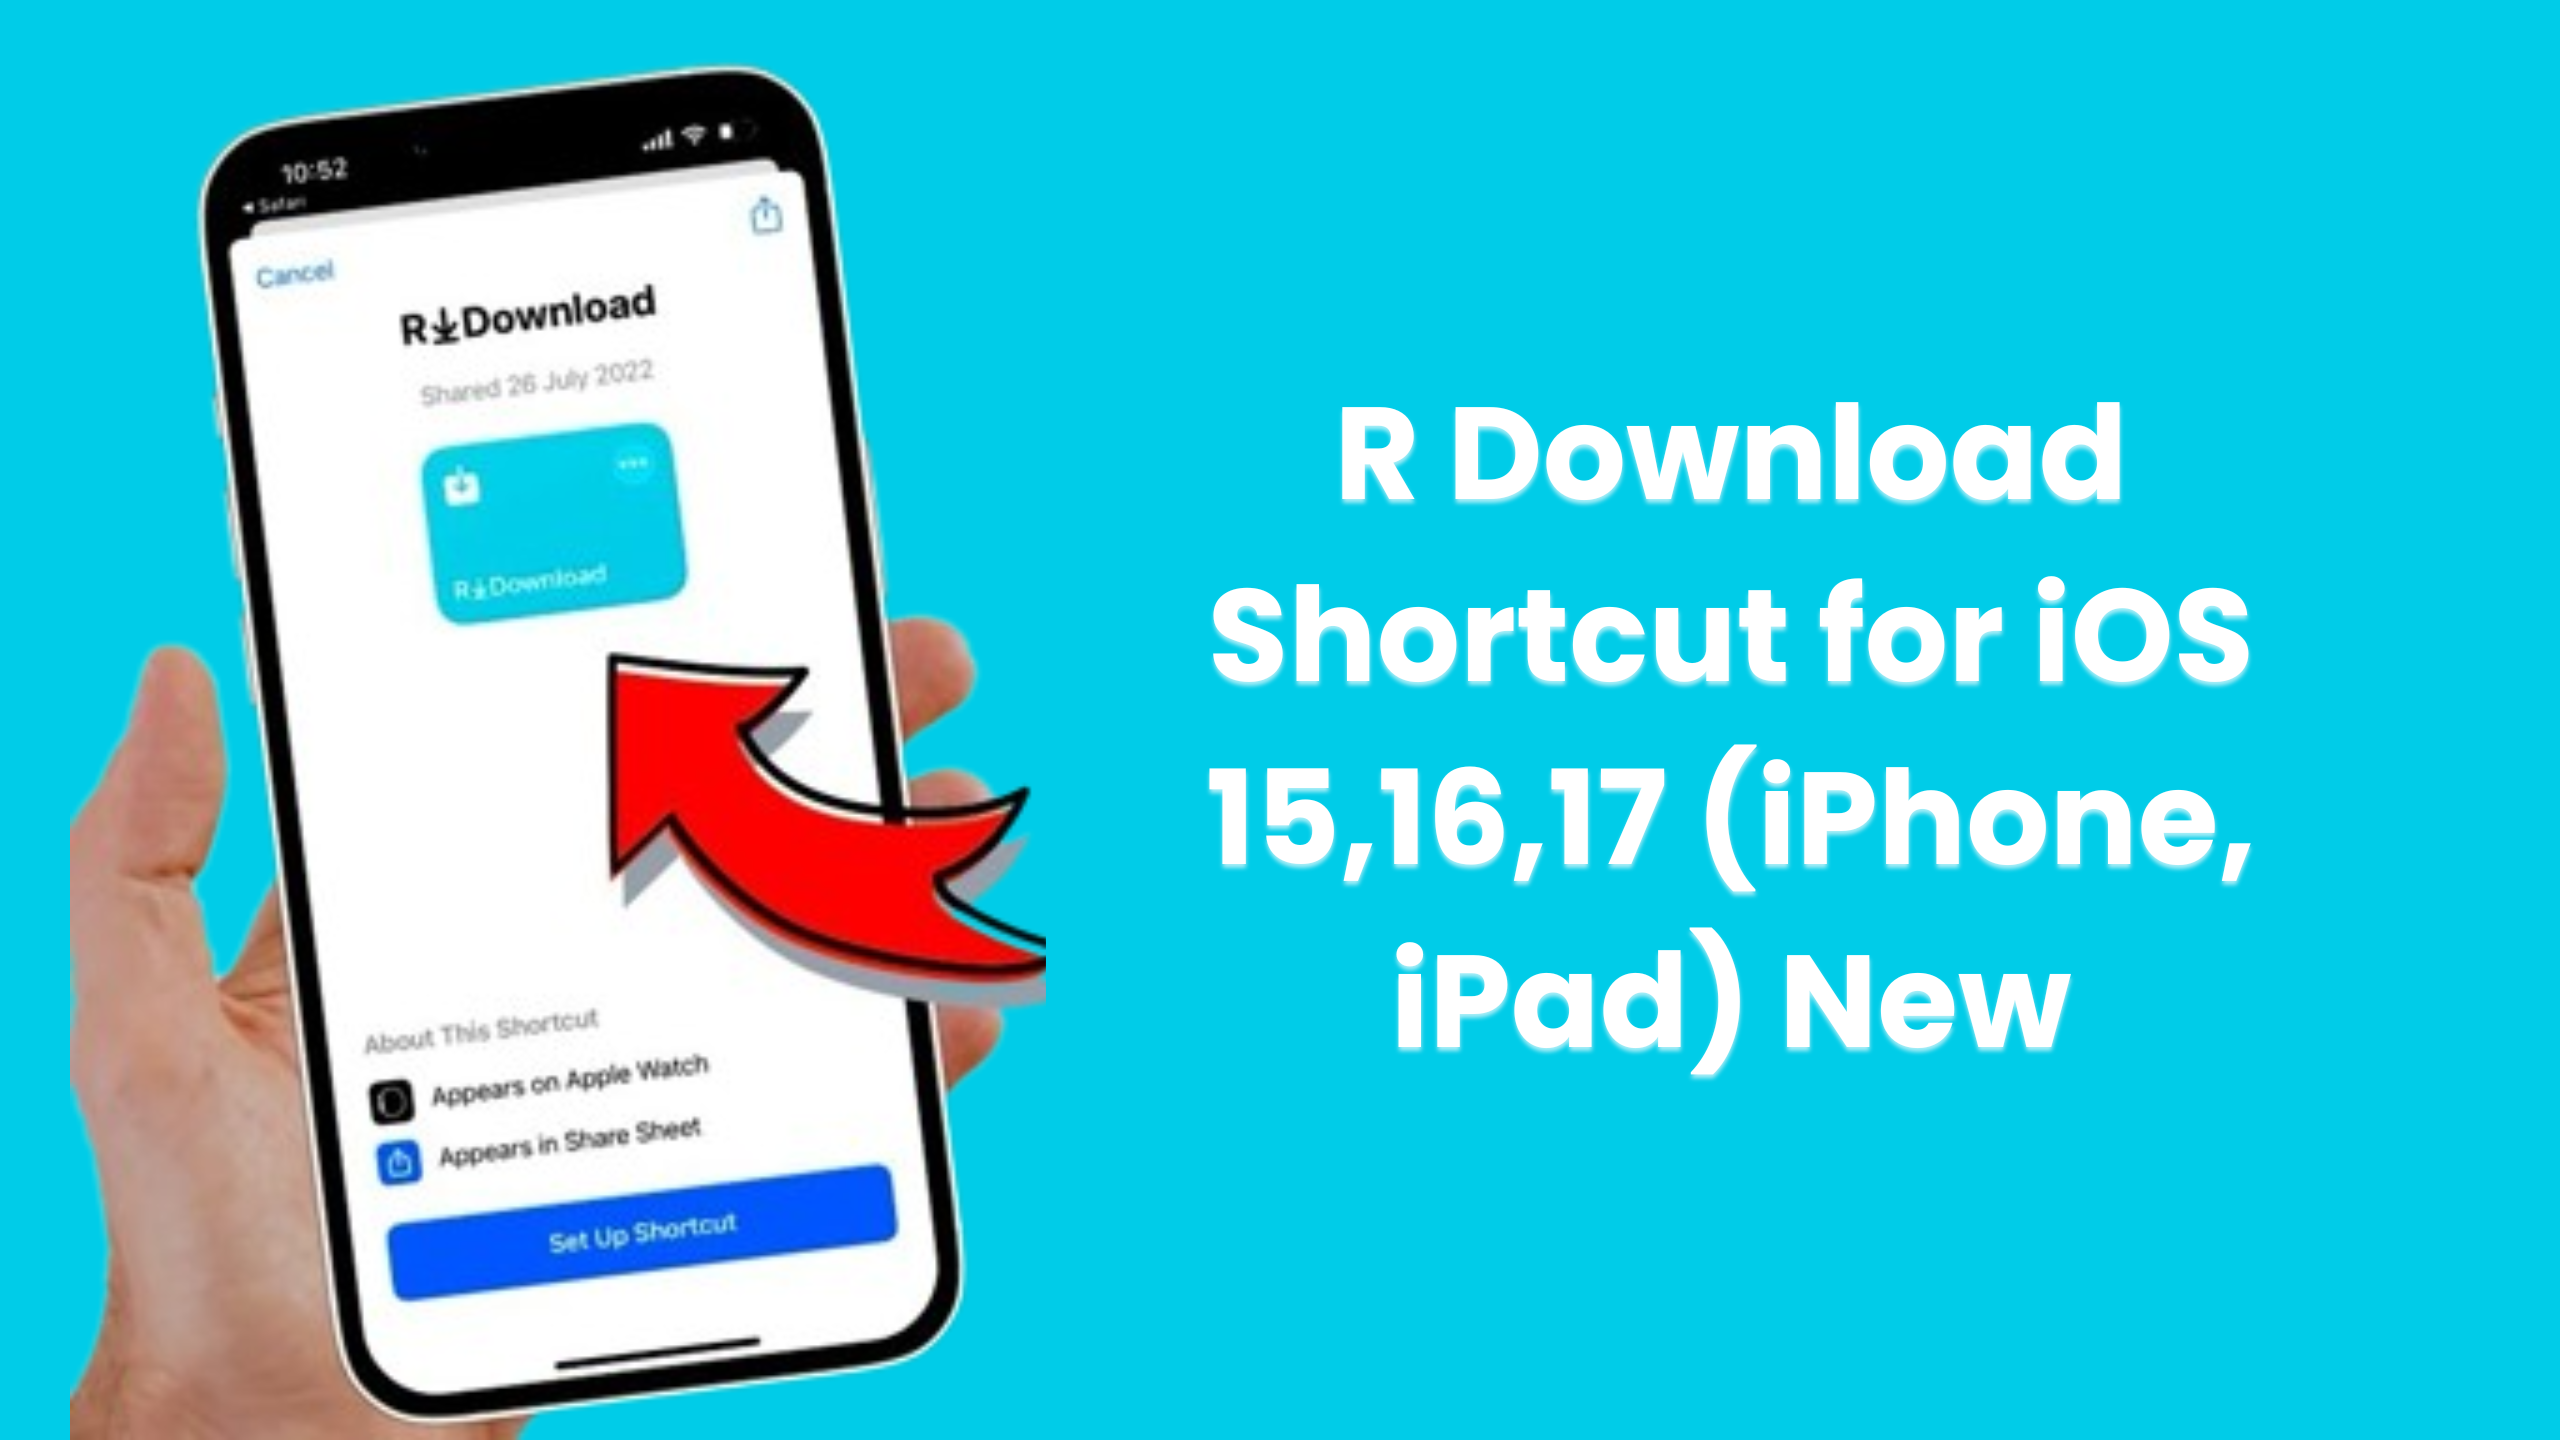 R Download Shortcut for iOS